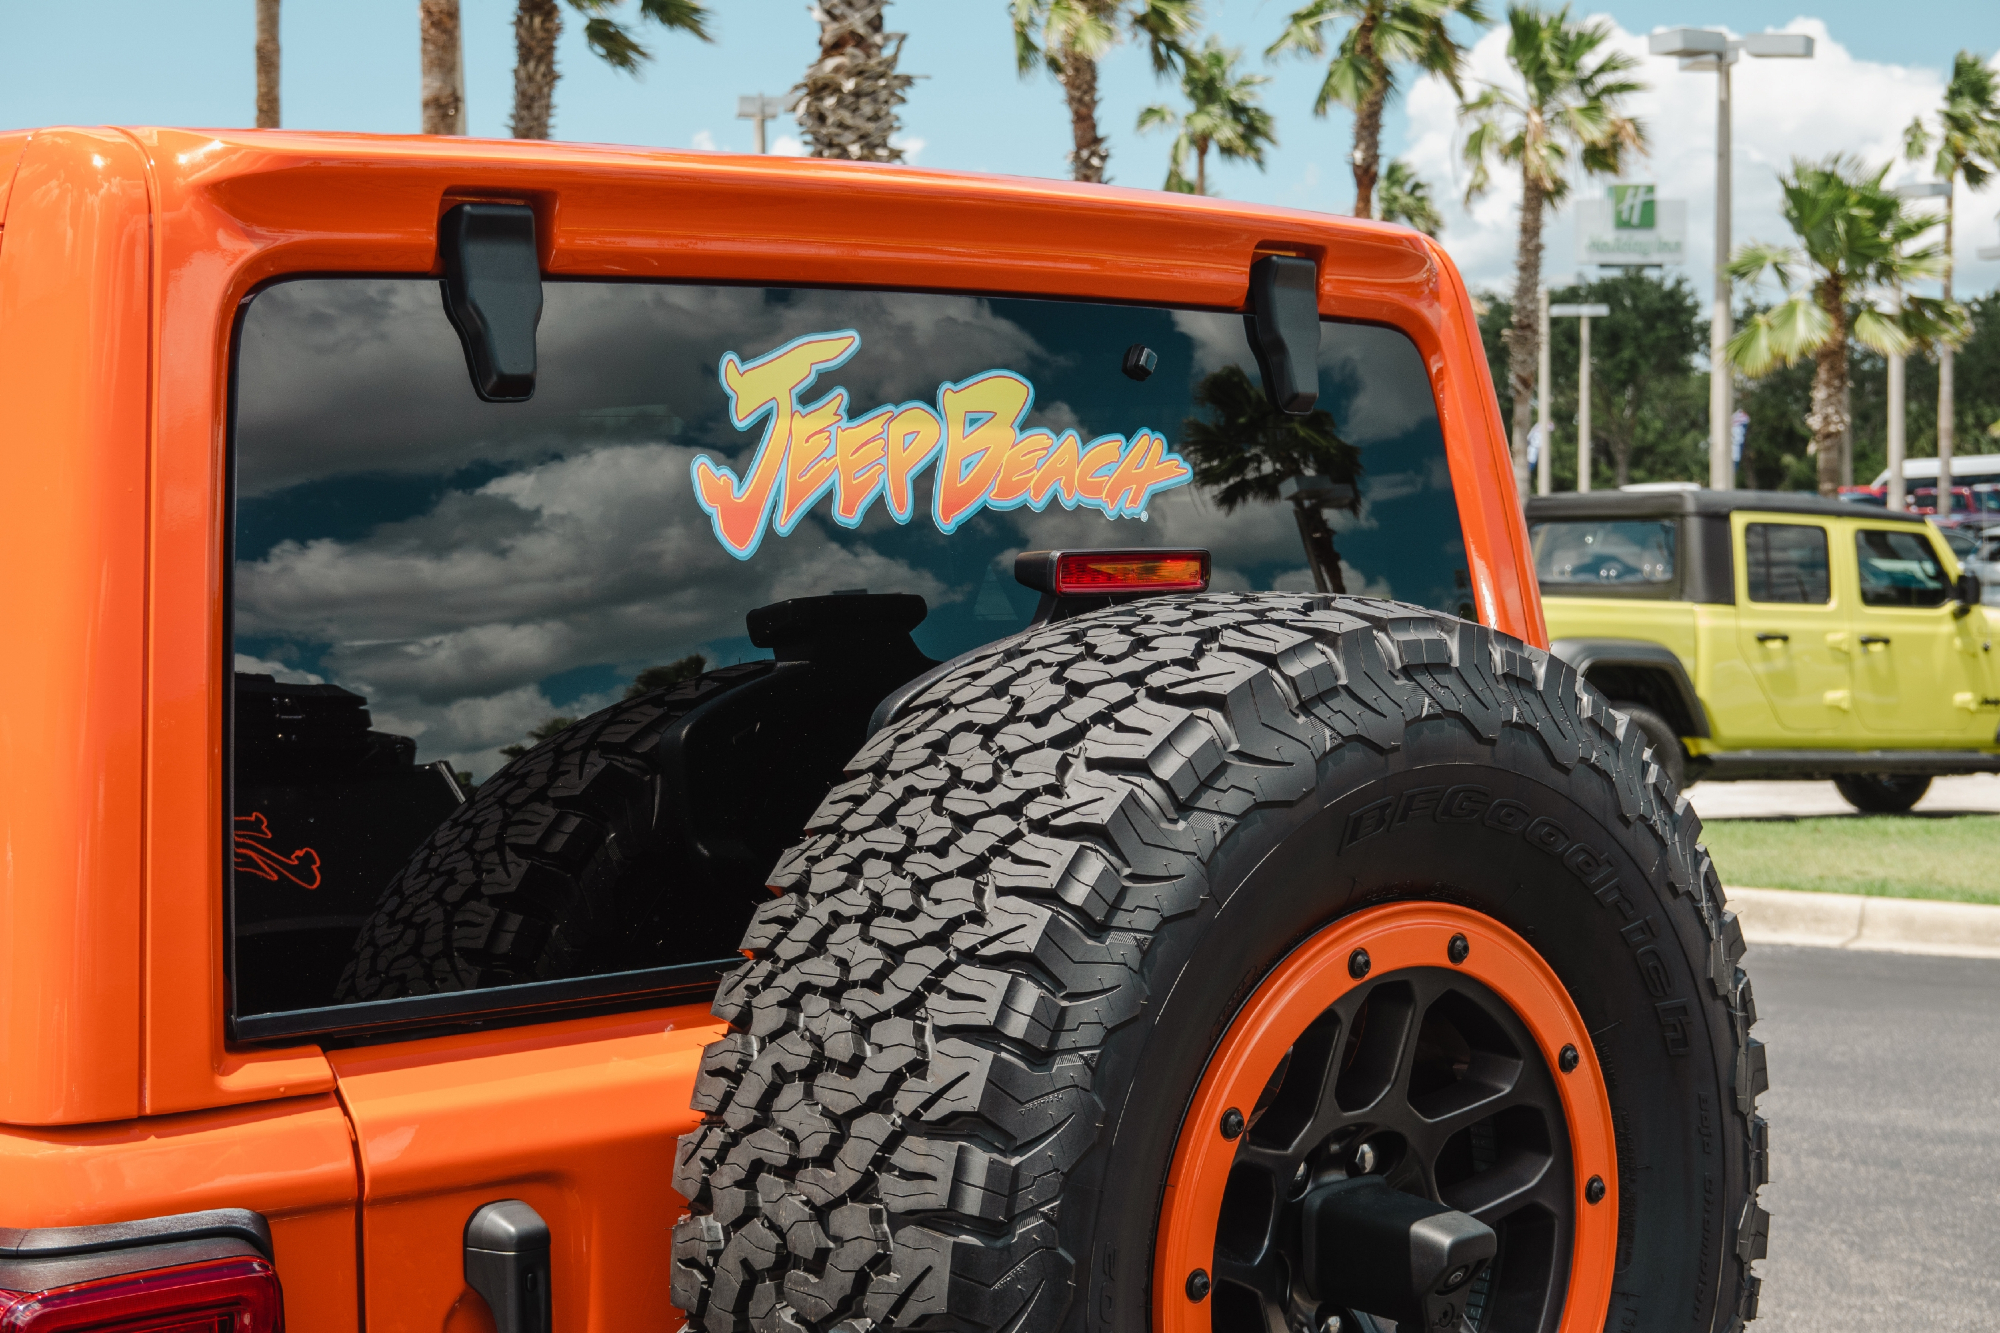 Photo from Jeep Beach Week 2023 of an the back of an orange Jeep Wrangler showing the Jeep Beach logo.